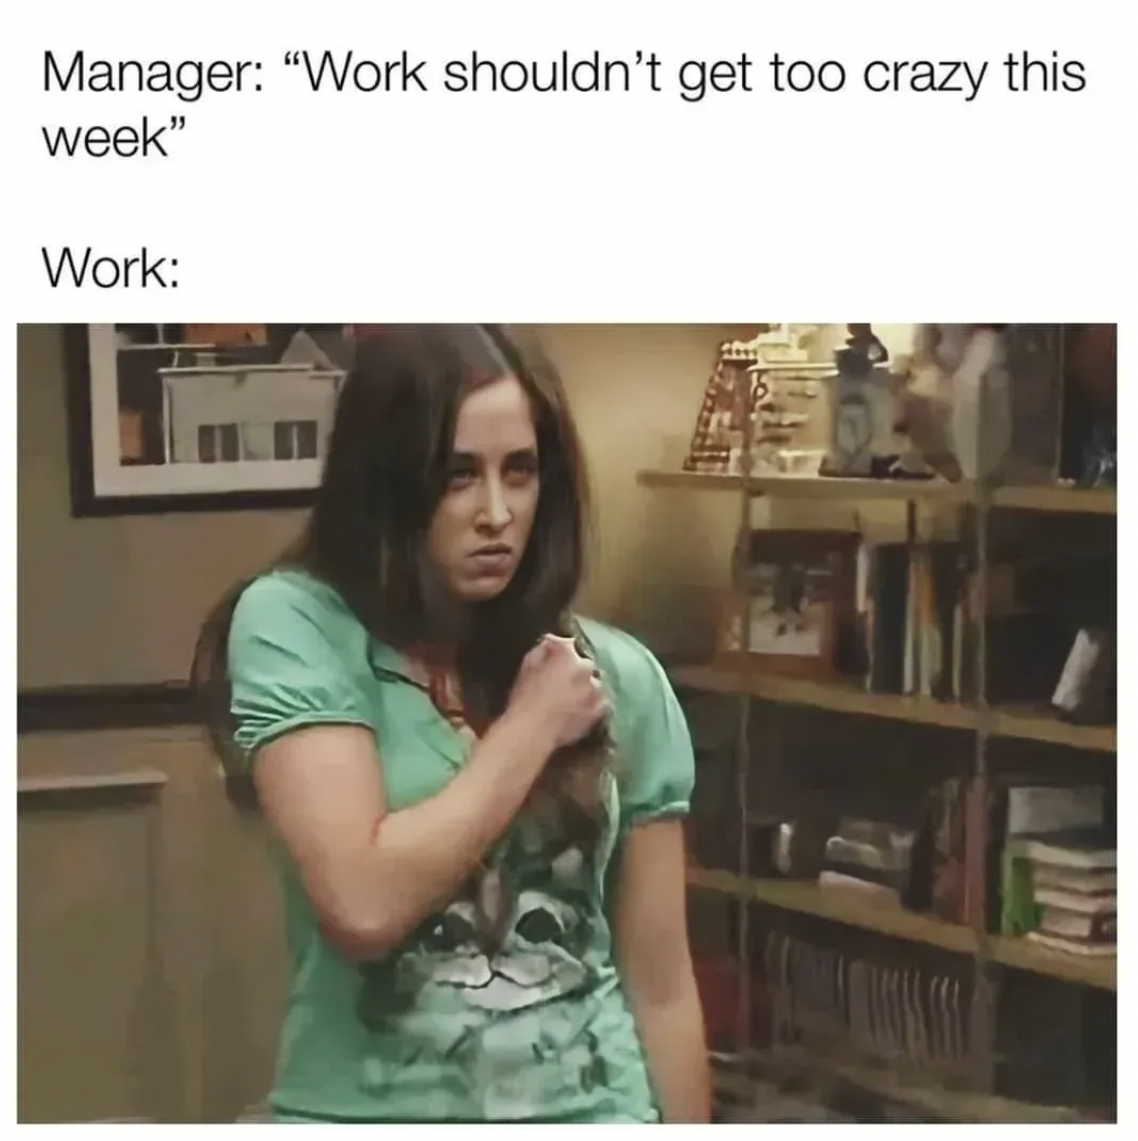 It's Always Sunny in Philadelphia memes - girl - Manager "Work shouldn't get too crazy this week" Work